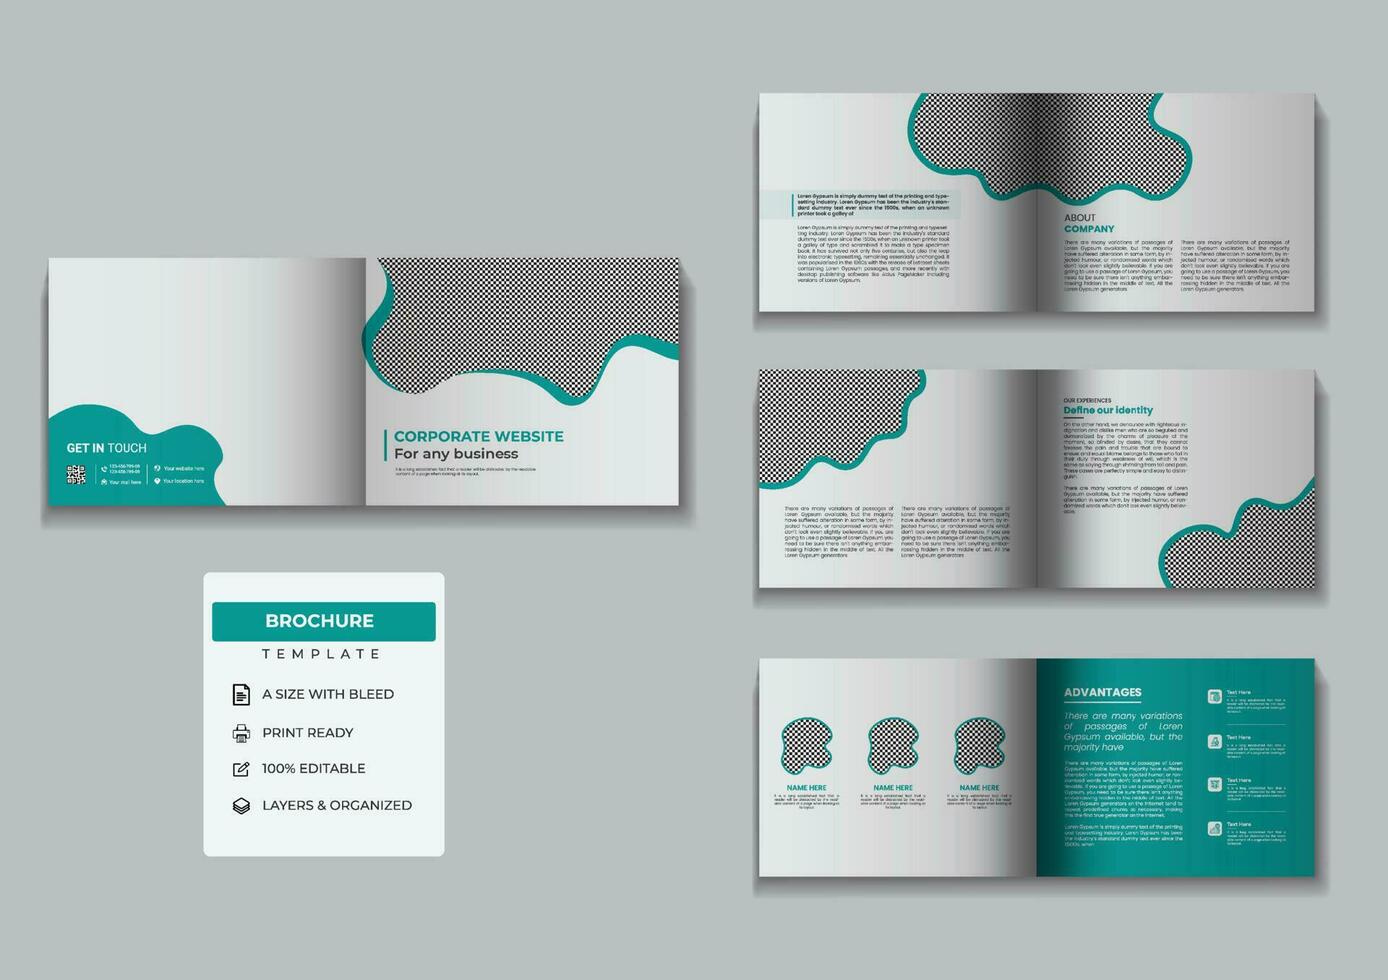 Awesome landscape brochure or profile design for your business or company vector